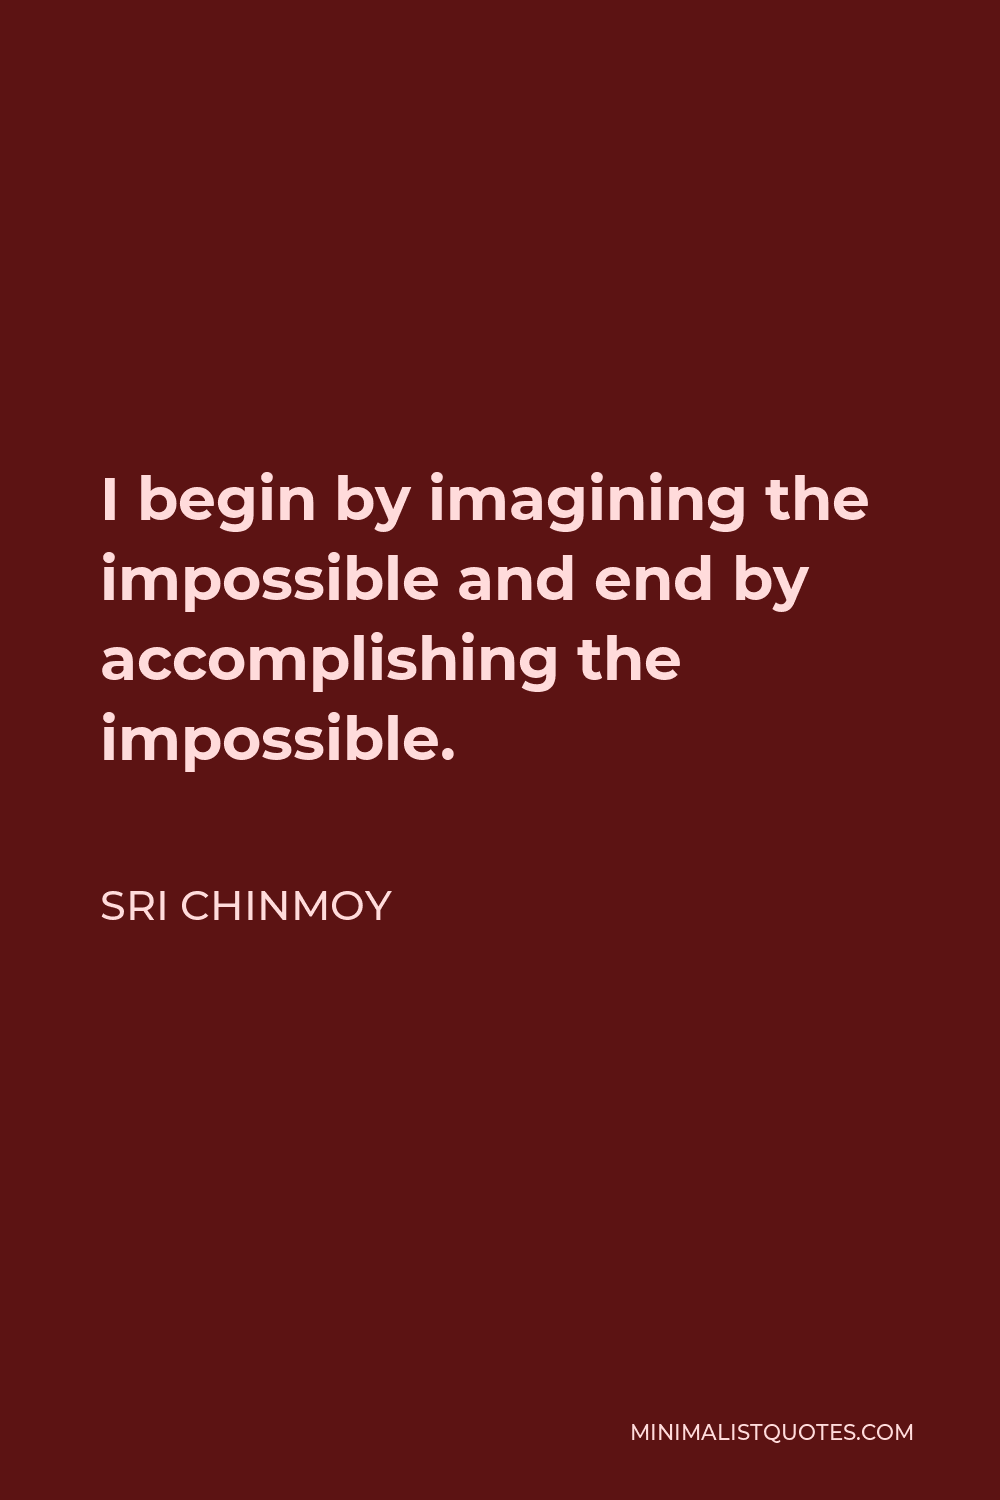 Sri Chinmoy Quote - I begin by imagining the impossible and end by accomplishing the impossible.